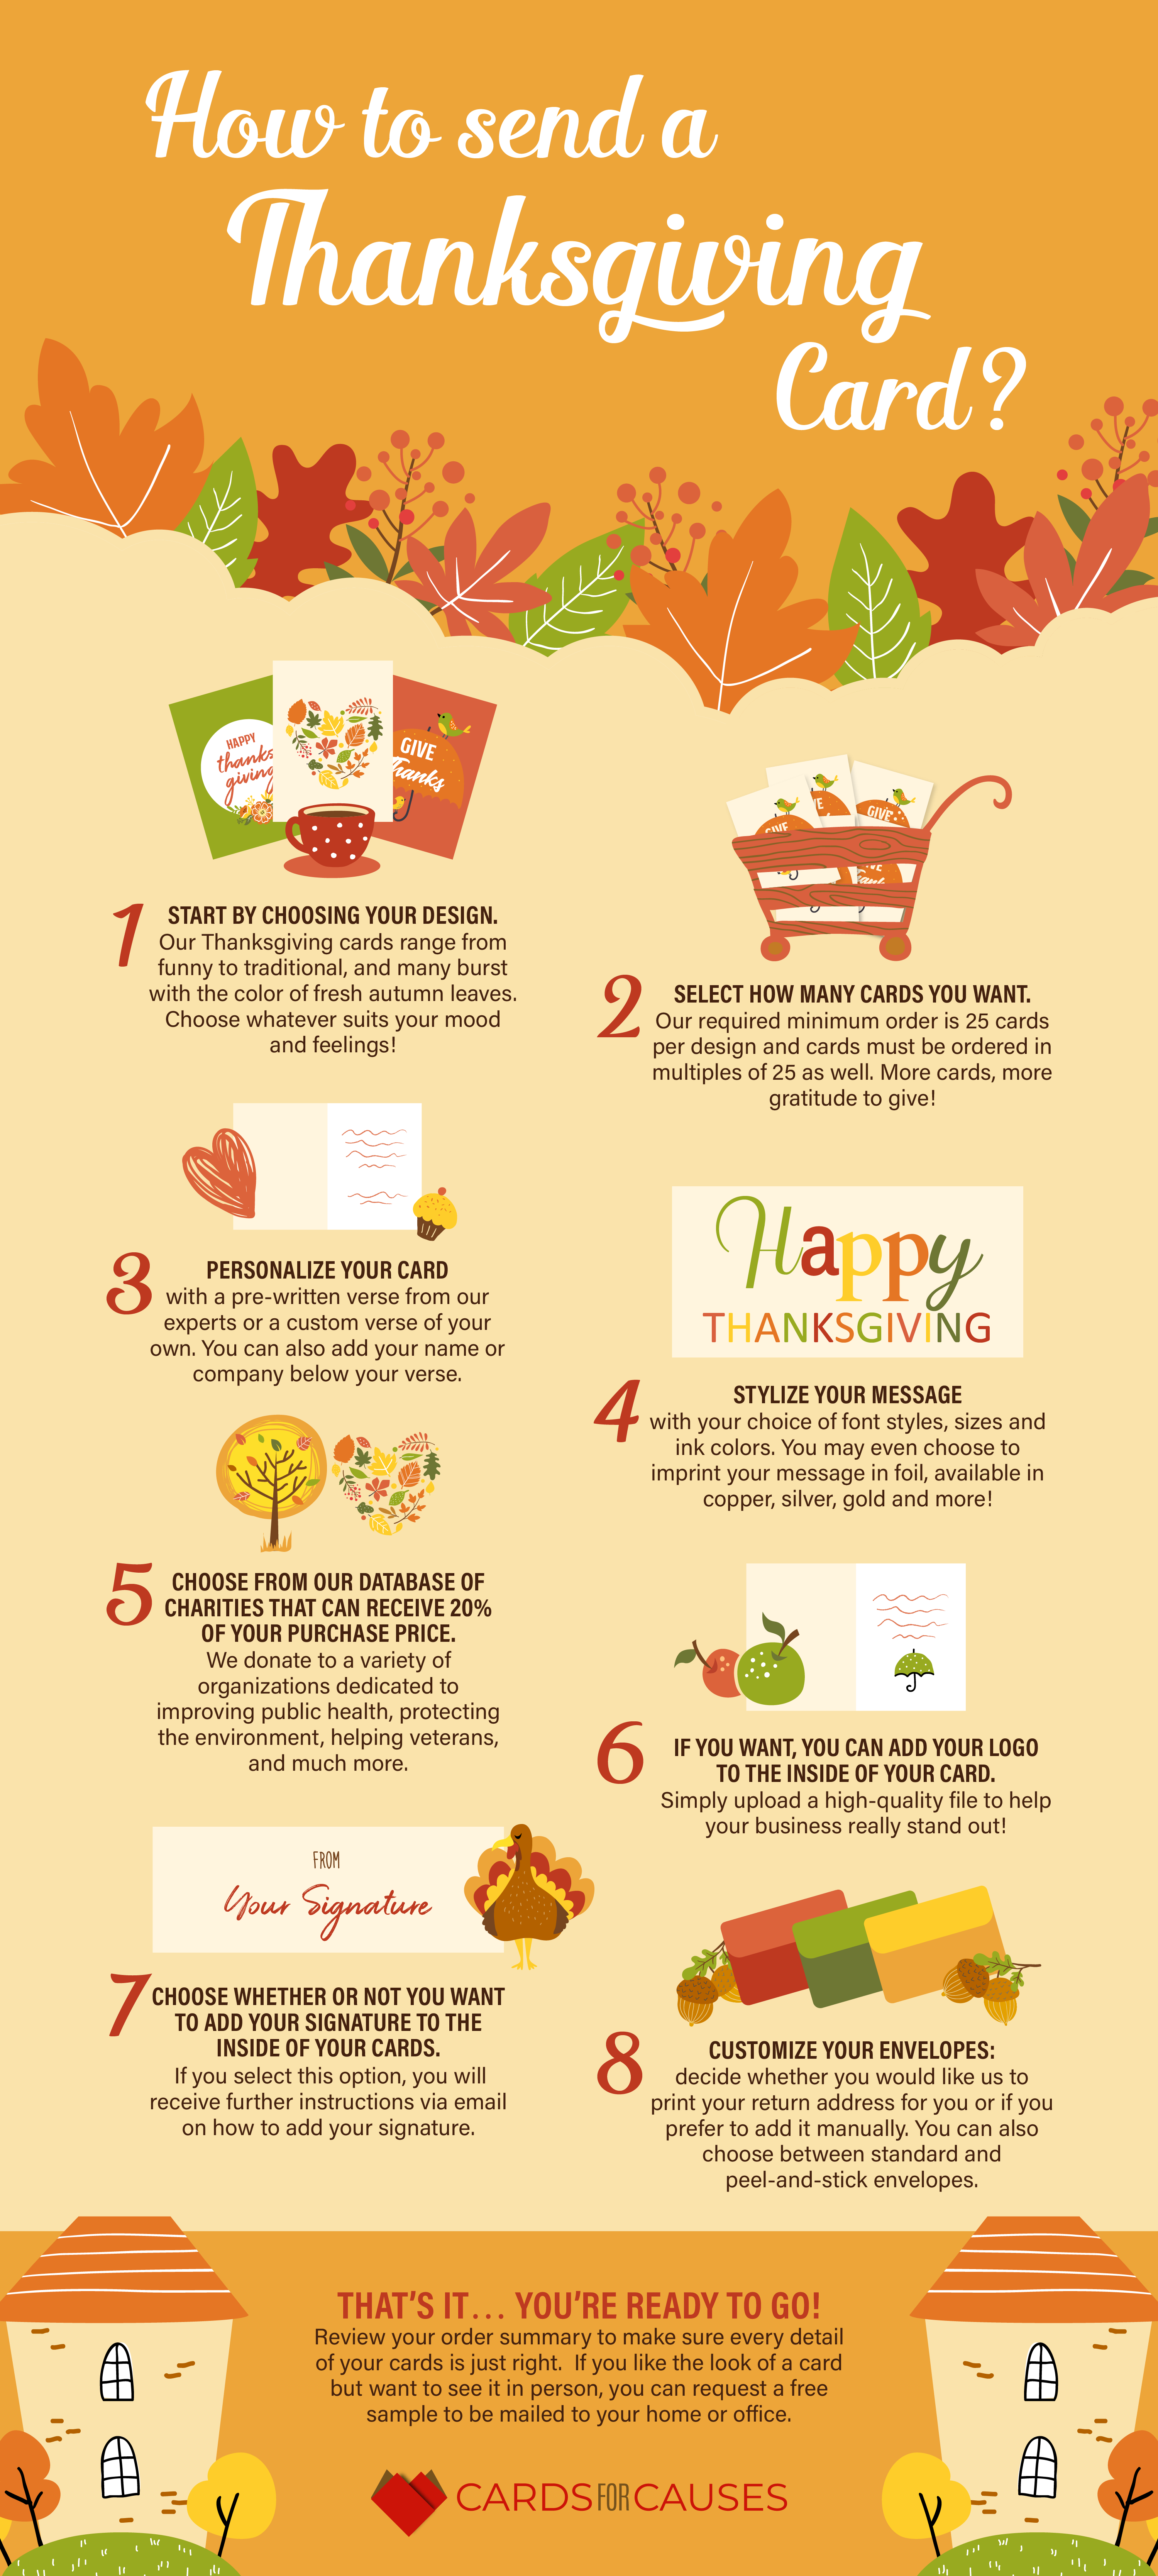 How to Send a Thanksgiving Card - Cards For Causes